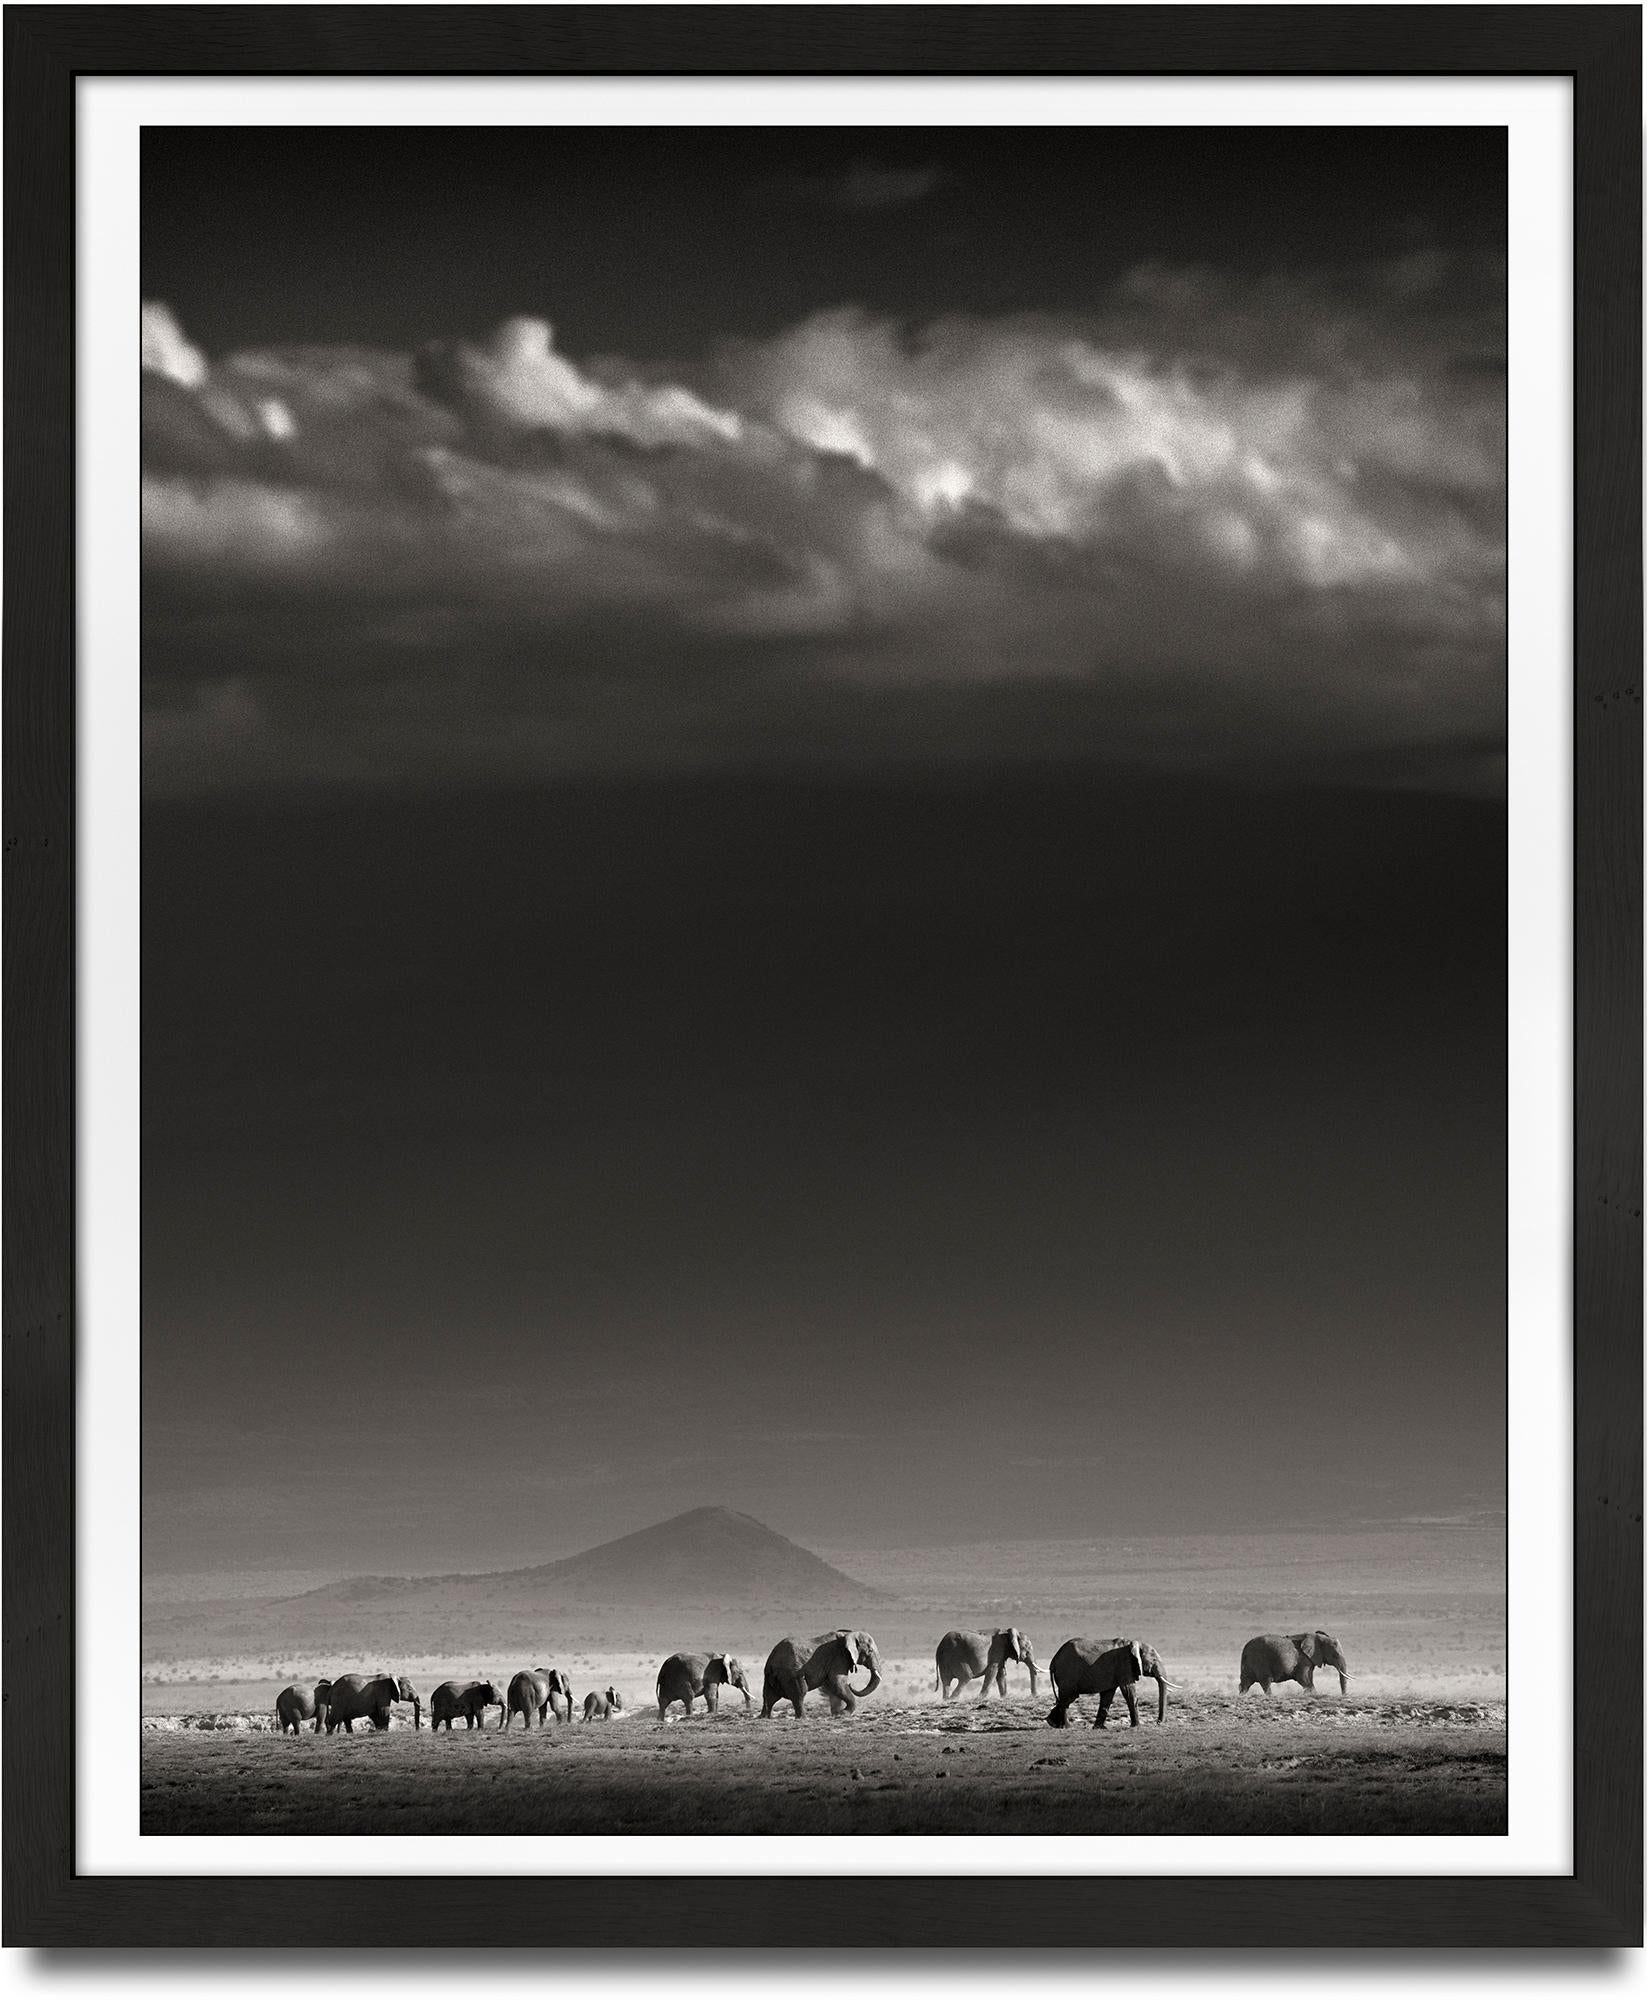 Elephant Family in front of Kilimanjaro, animal, black and white photography - Photograph by Joachim Schmeisser